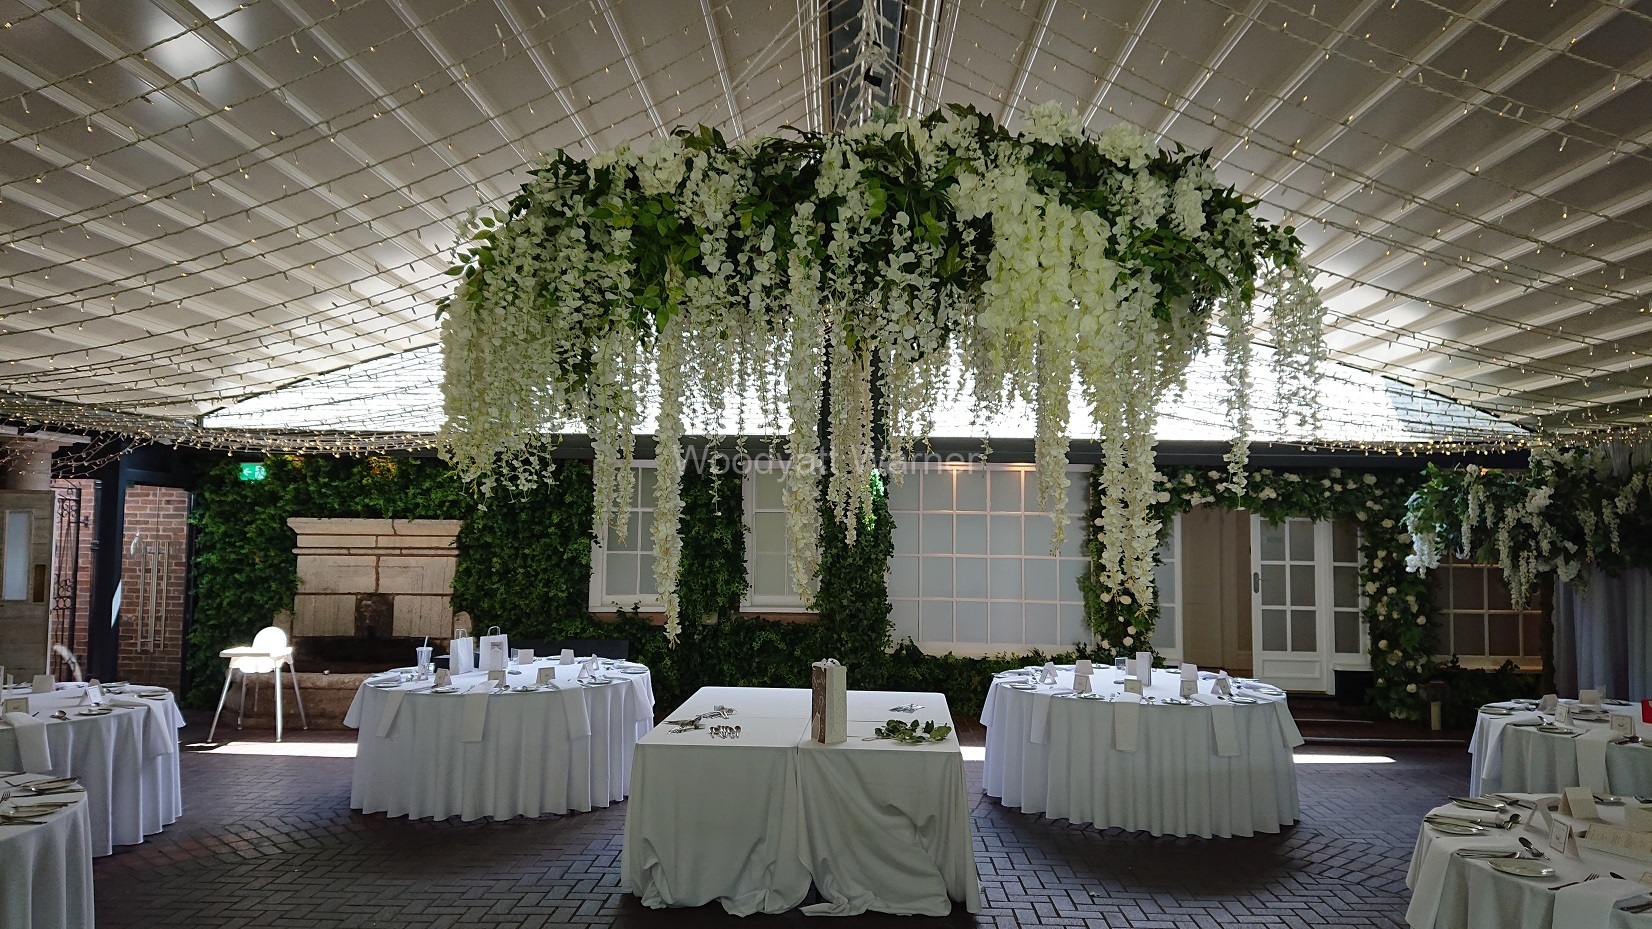 Suspended wisteria display